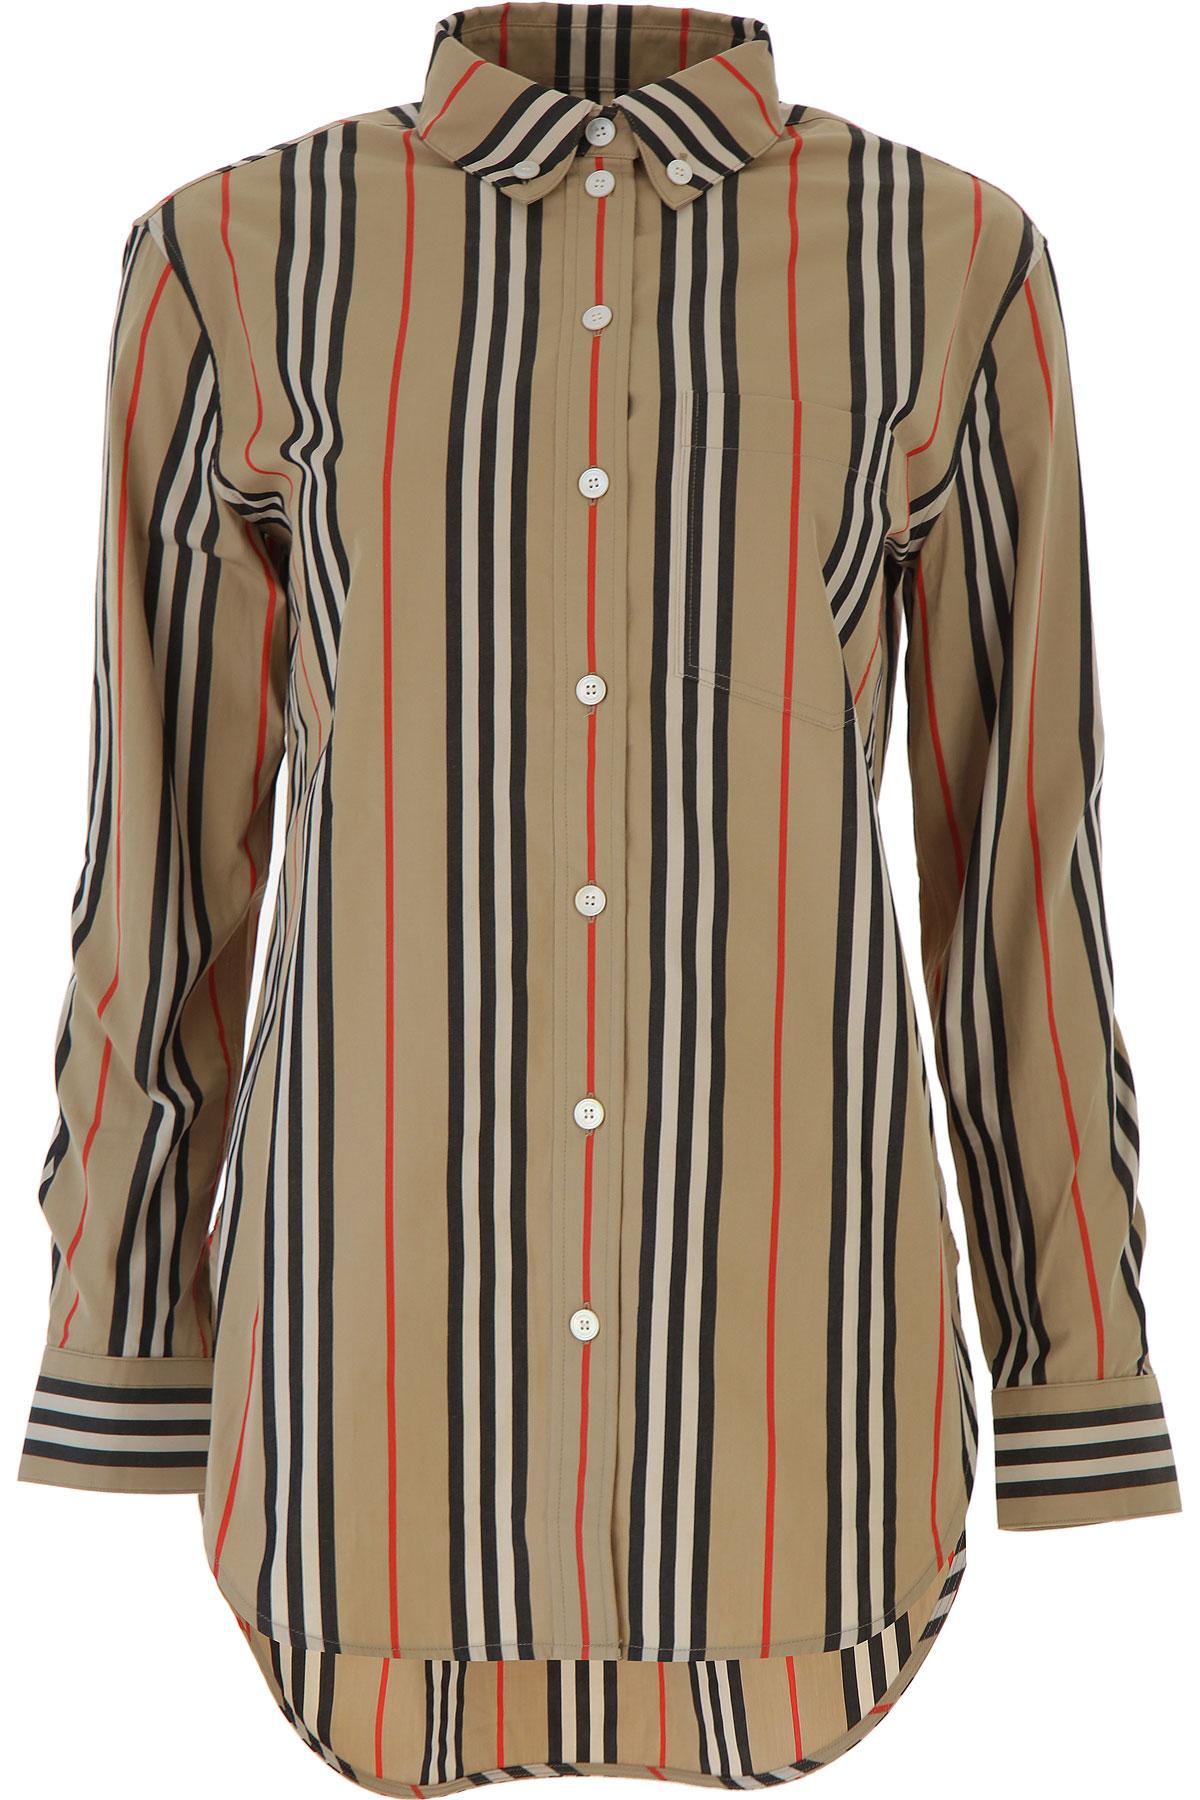 Burberry Shirt For Women in Natural - Lyst